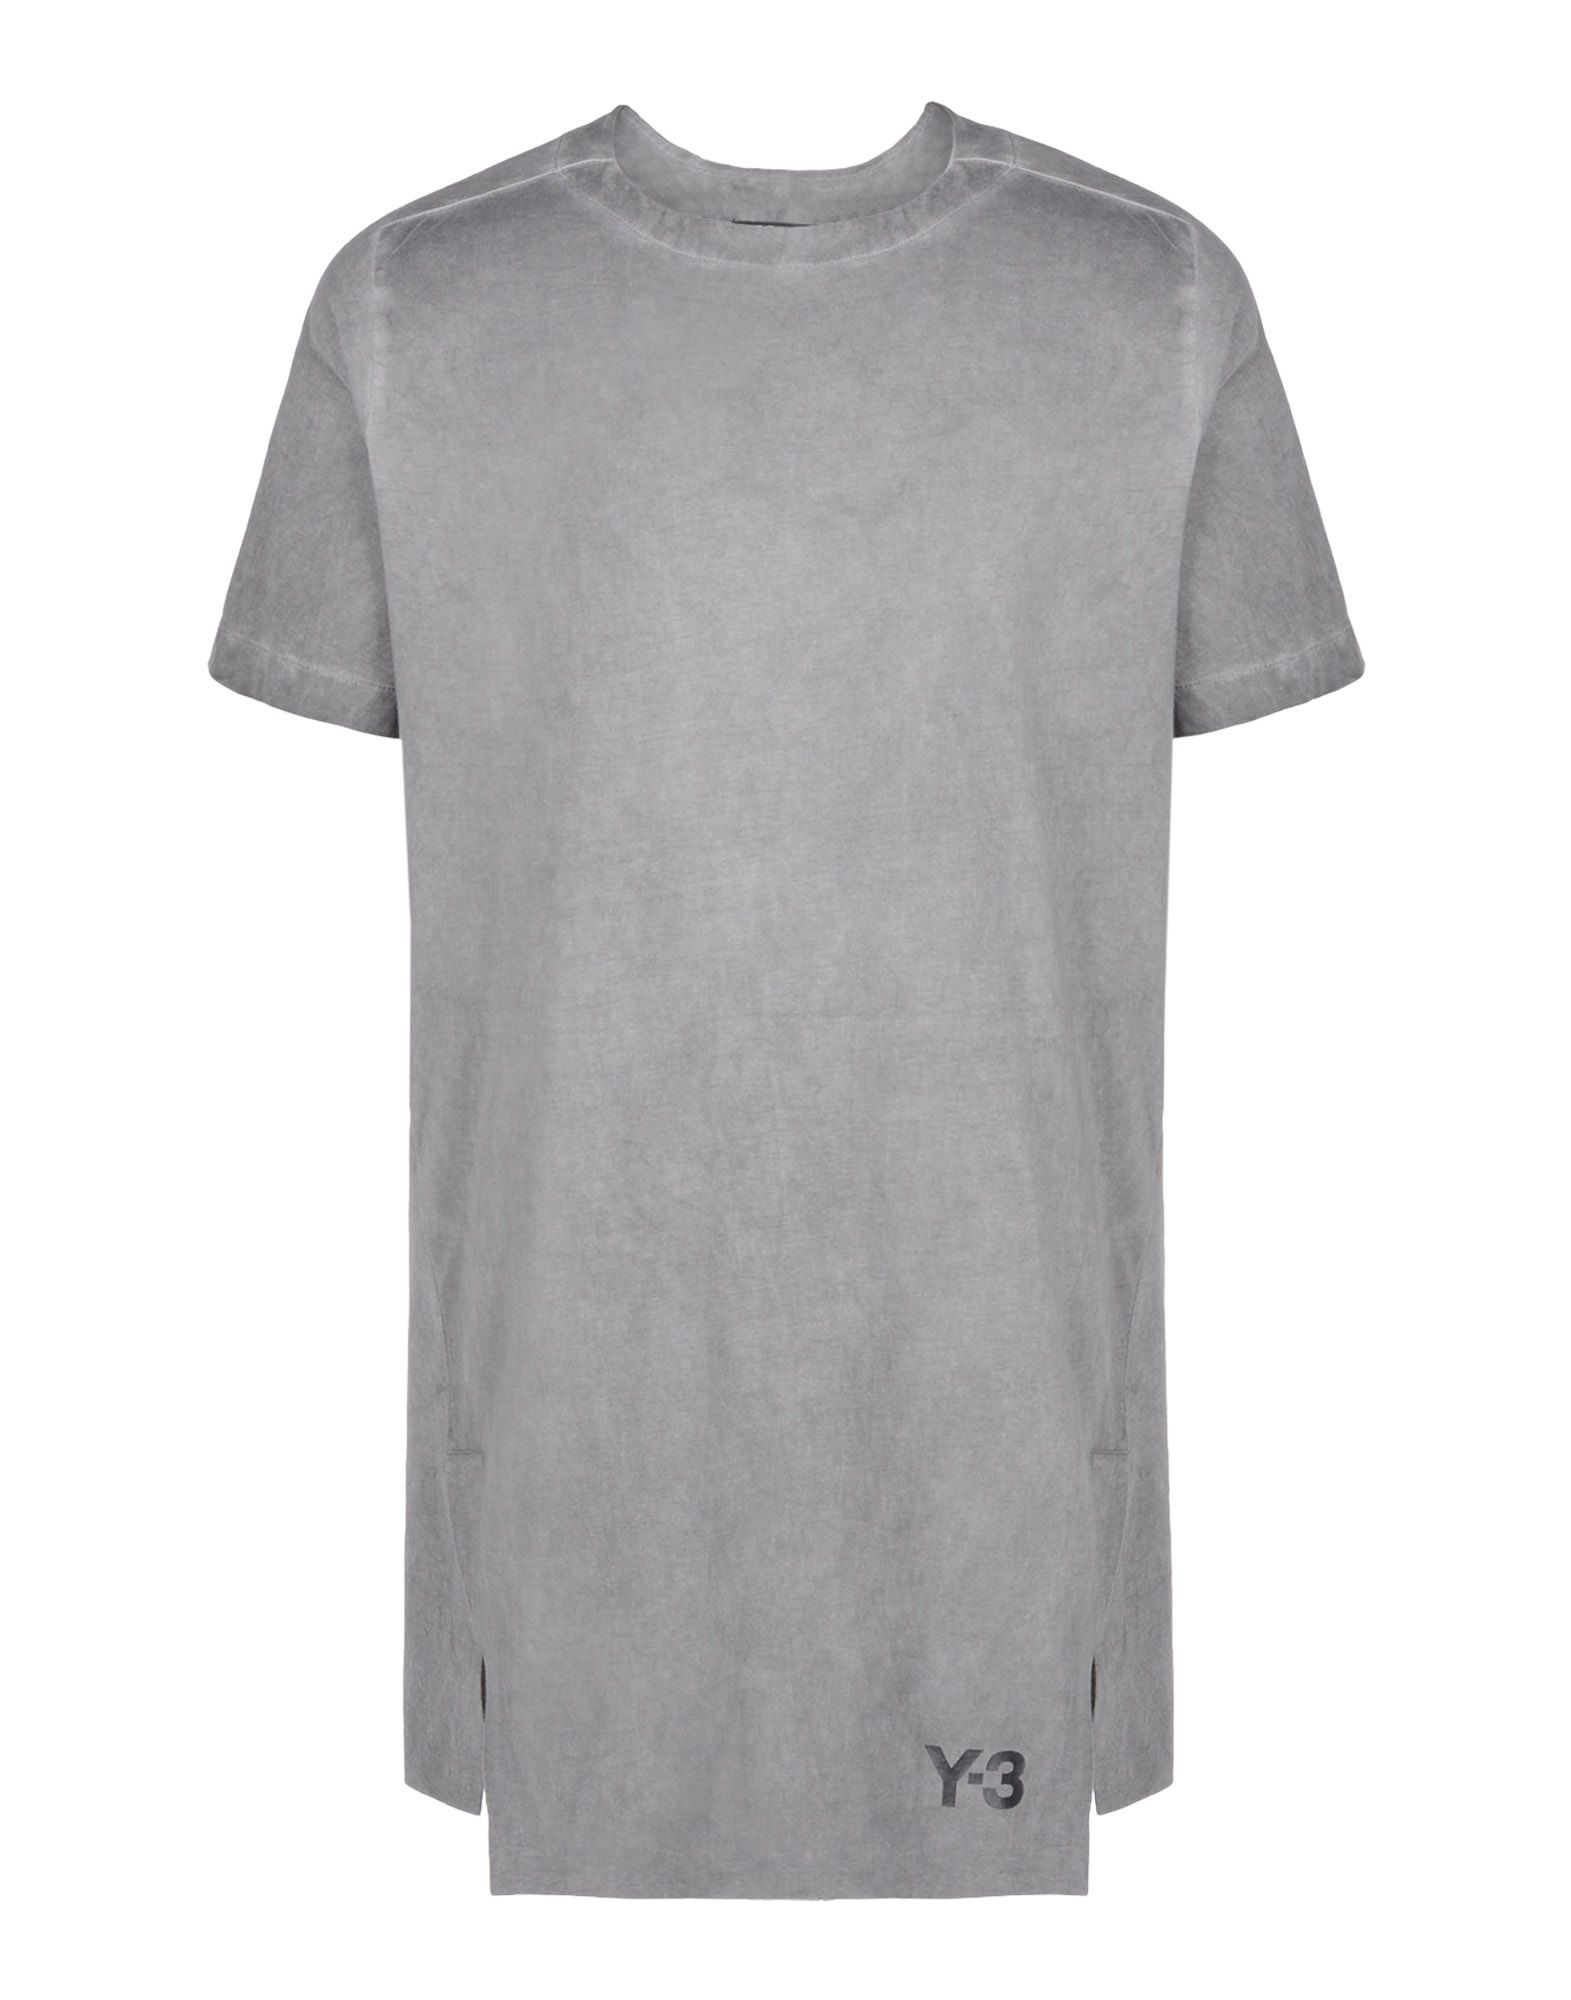 Y 3 PLANET TEE for Women | Adidas Y-3 Official Store